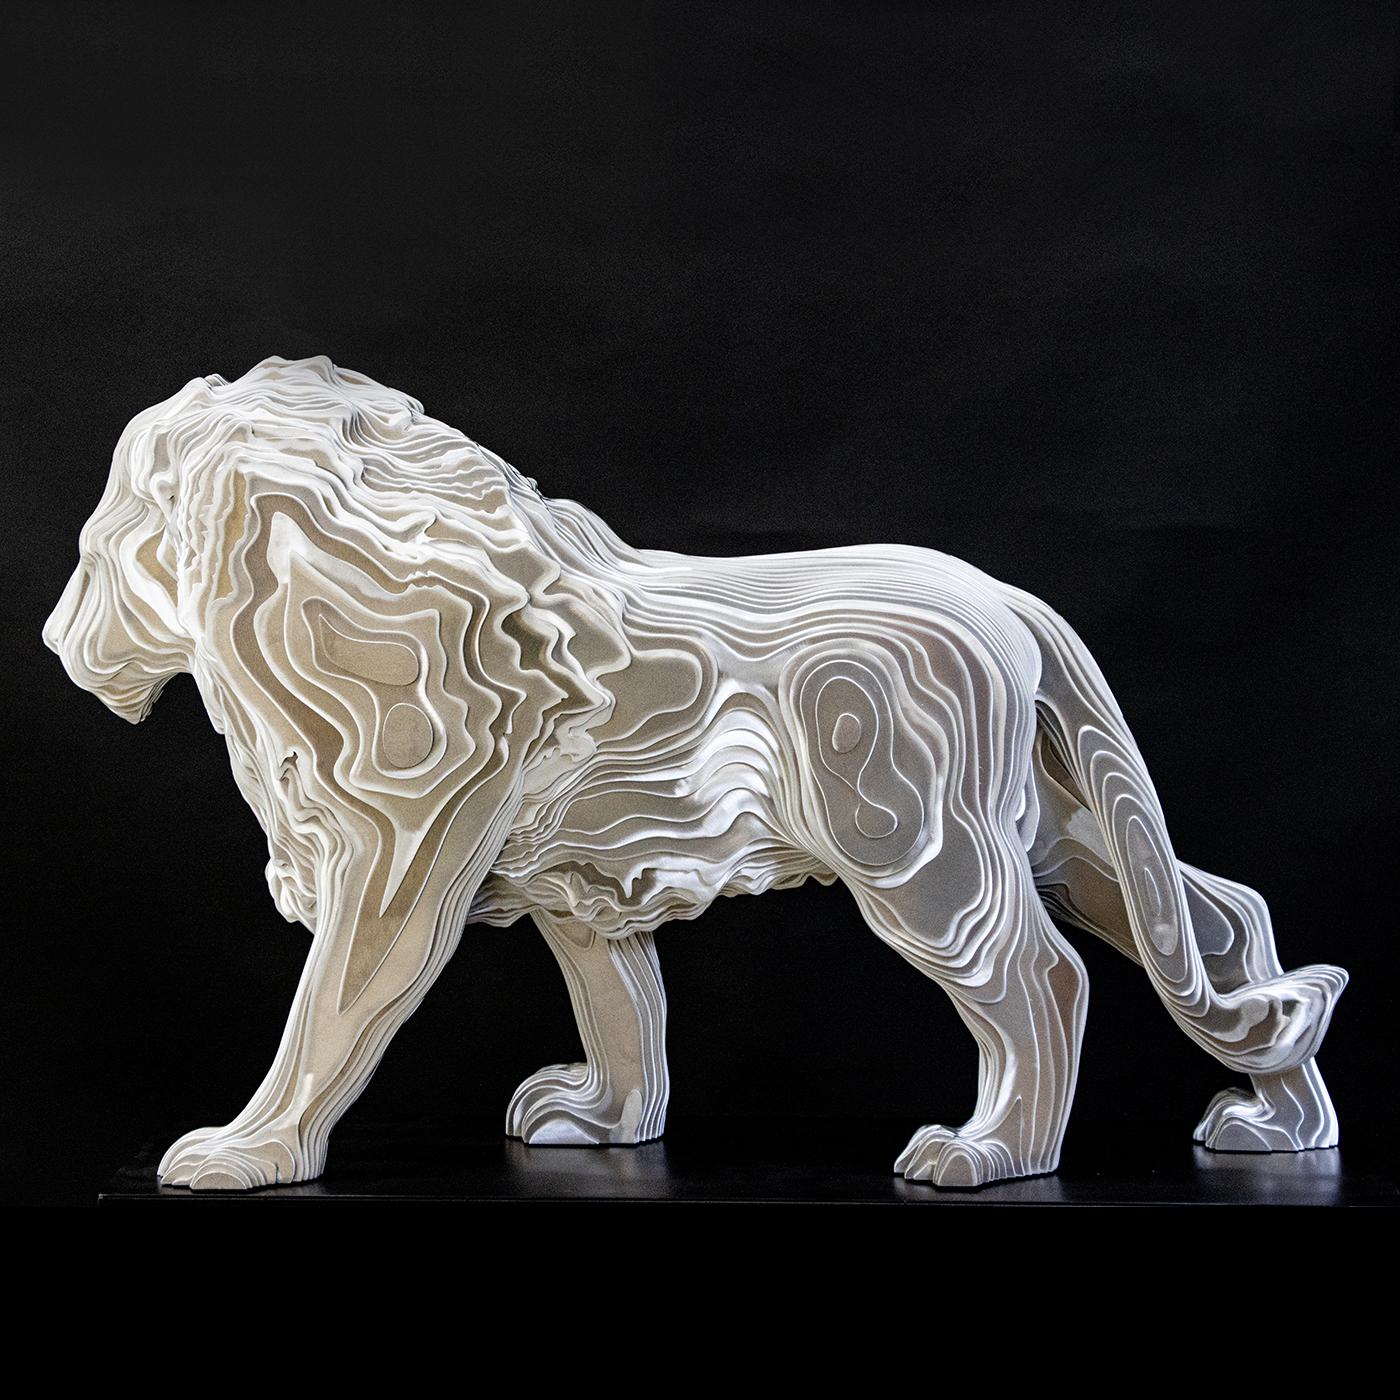 Sculpture lion polished made with aluminium 
hand-crafted plates. Limited edition of 8 pieces 
made in welded and shaped aluminium into masterful 
works of contemporary art.